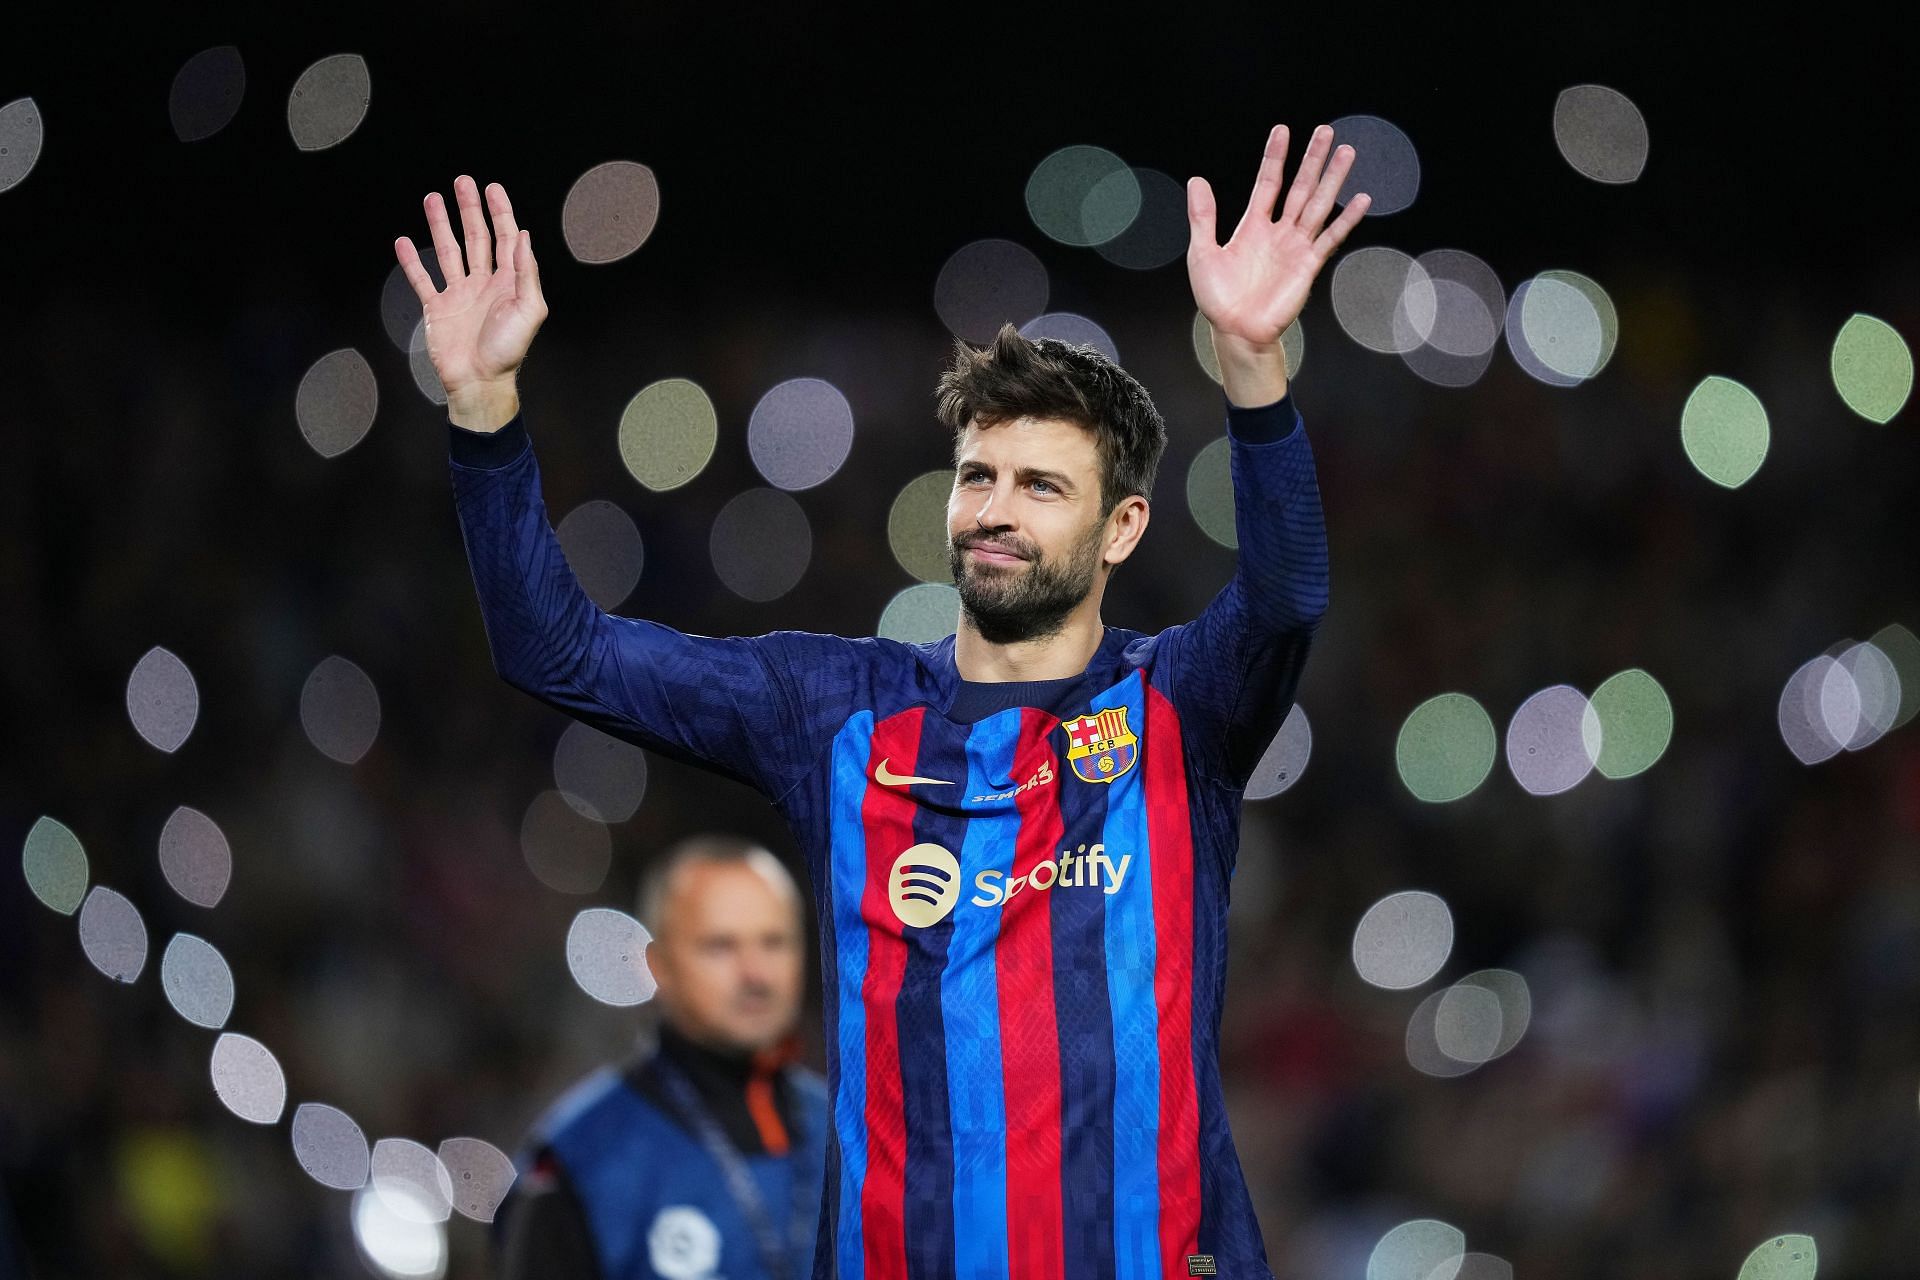 Gerard Pique claims that Messi is the GOAT ahead of Ronaldo.